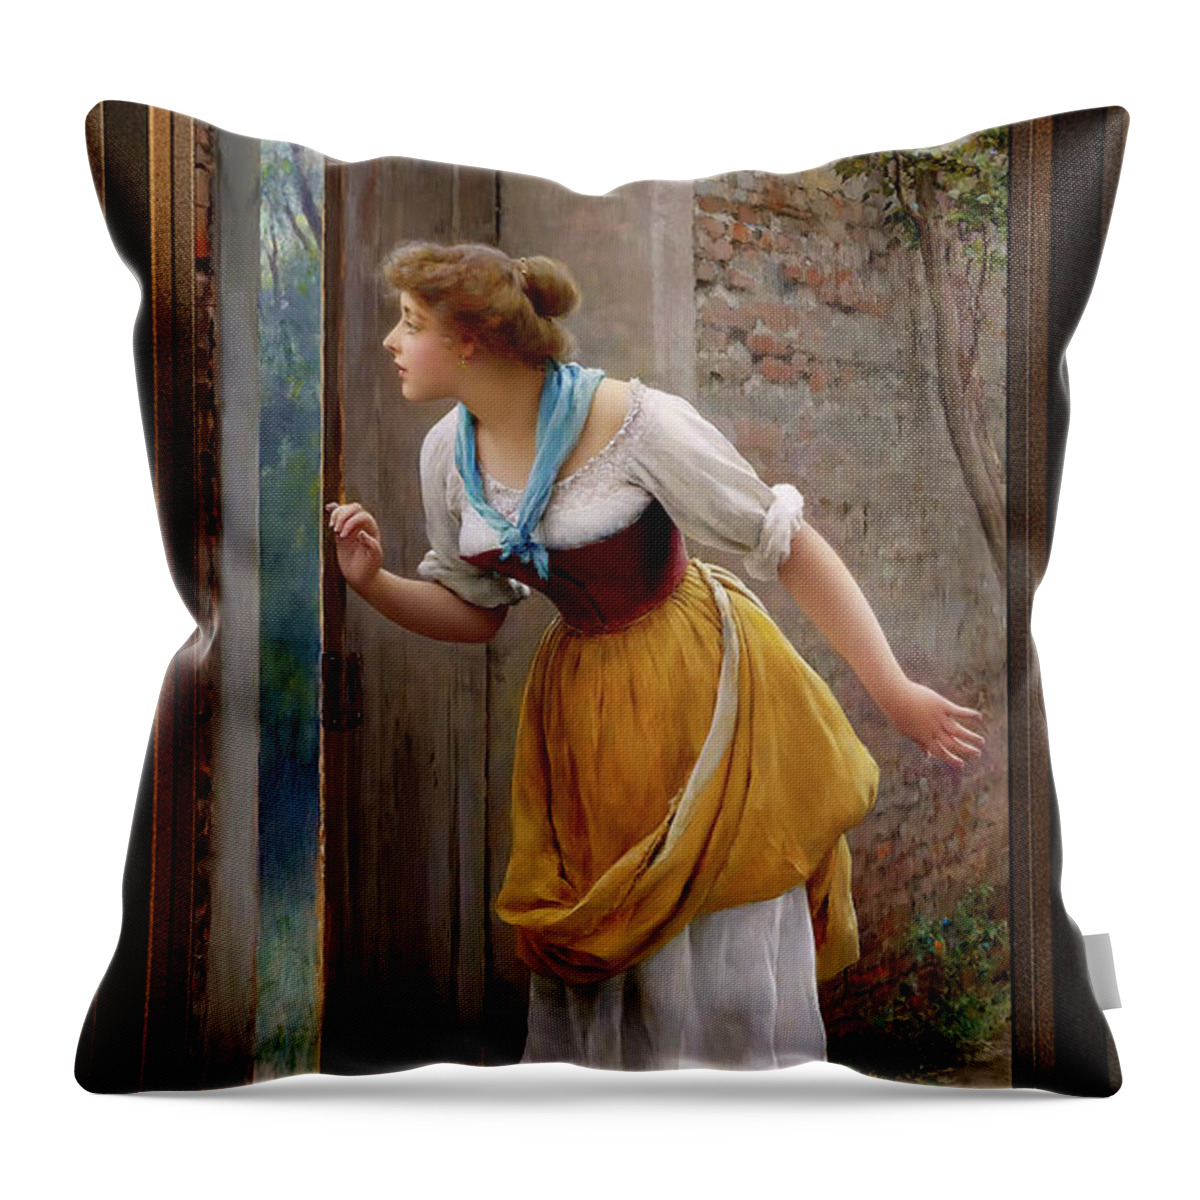 The Eavesdropper Throw Pillow featuring the painting The Eavesdropper by Eugen von Blaas Remastered Xzendor7 Classical Fine Art Reproductions by Xzendor7